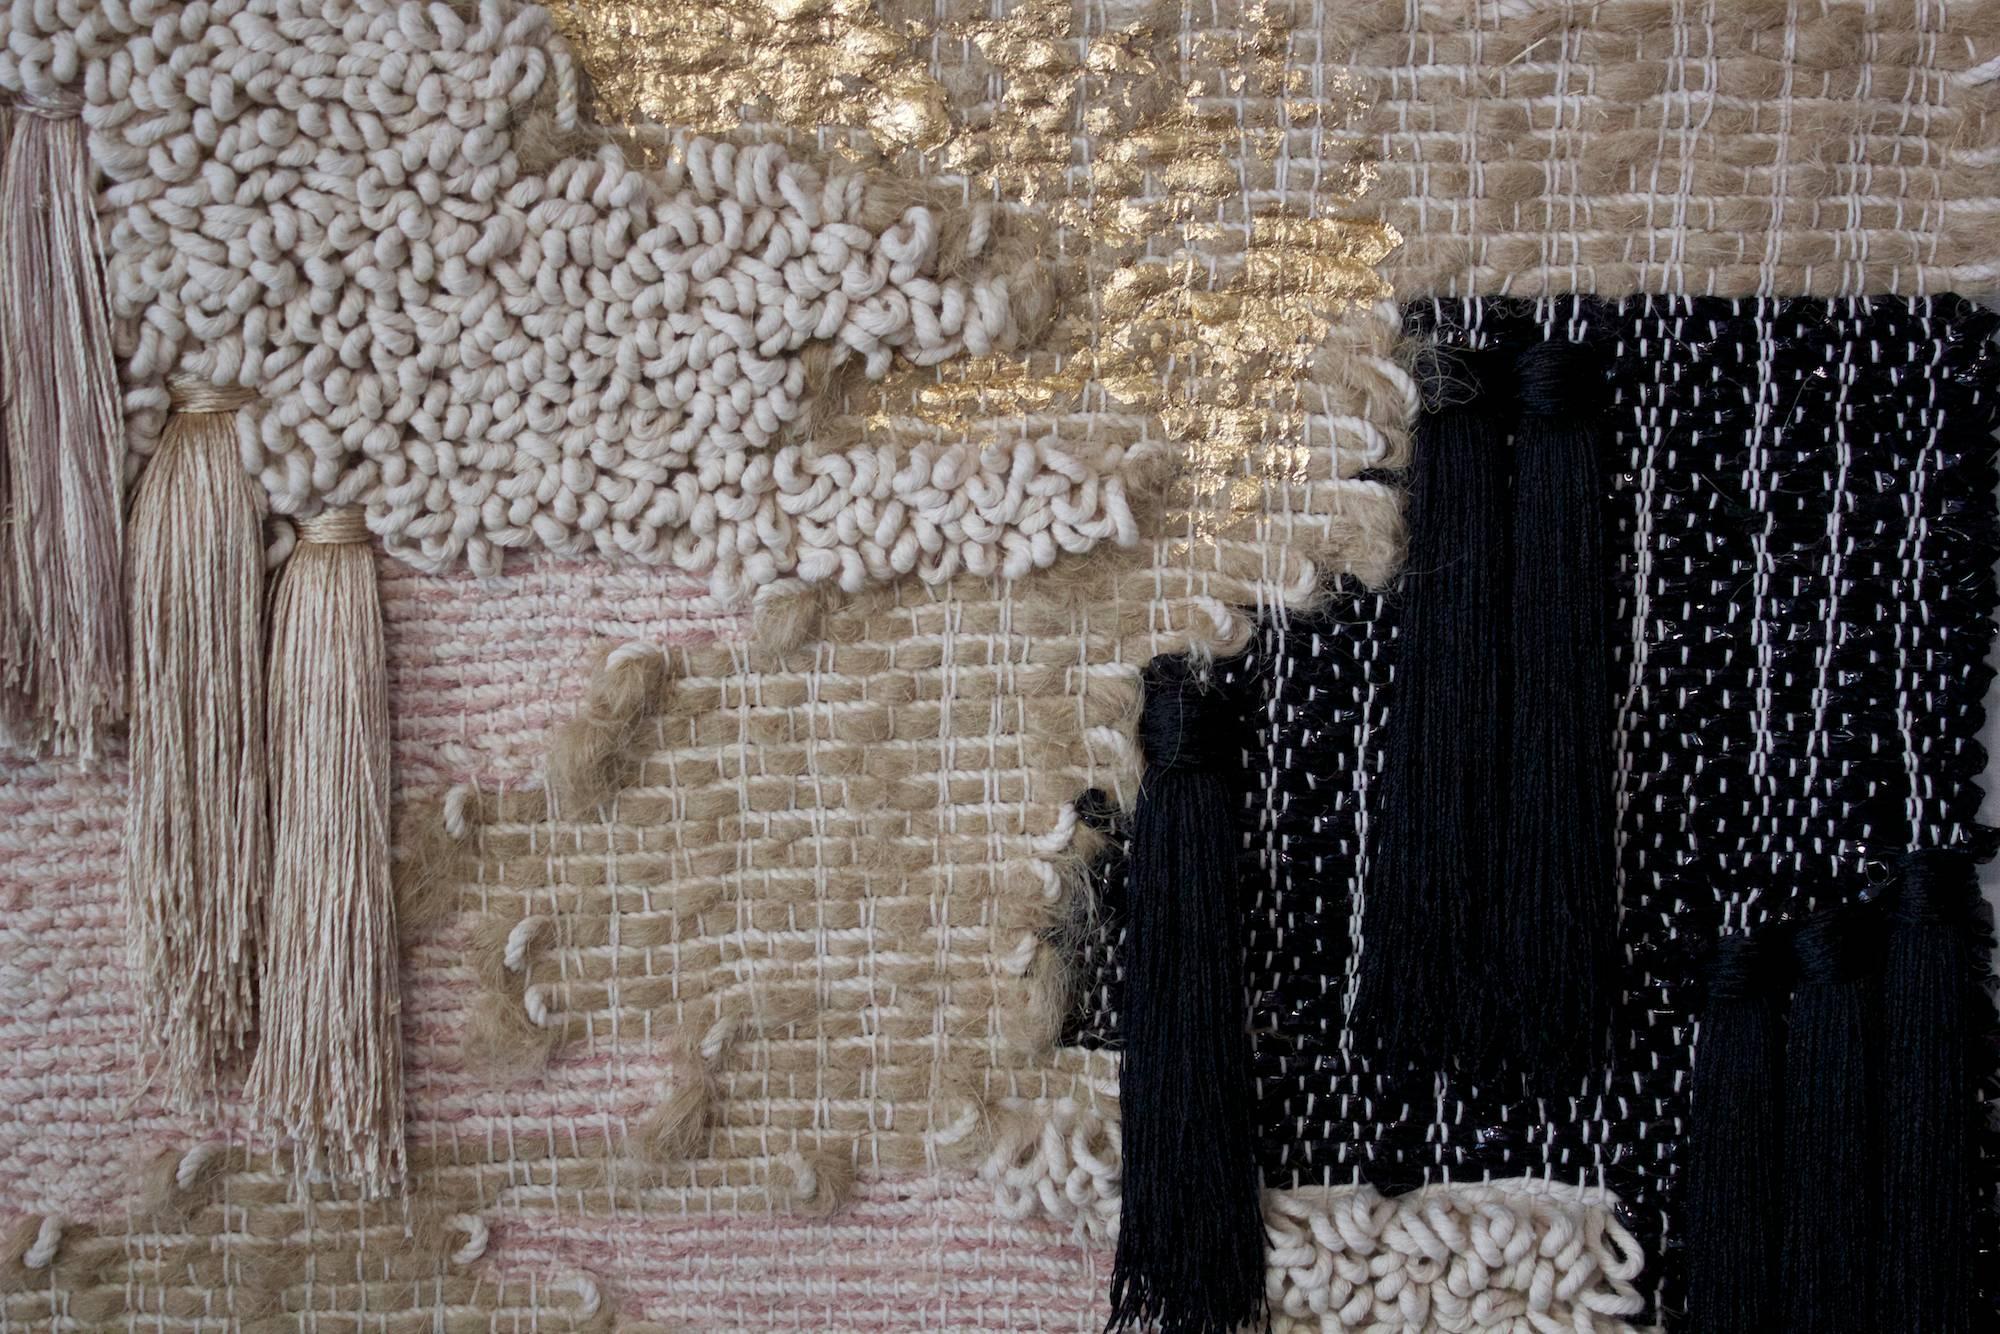 Handwoven, tapestry style, wall hanging by Janelle Pietrzak of All Roads. Pale pink yarns contrast with black. Shiny viscose tassels are drapey, and gold leafing is applied to rustic hemp fiber. Weaving hangs from a solid steel rod. 

This textile